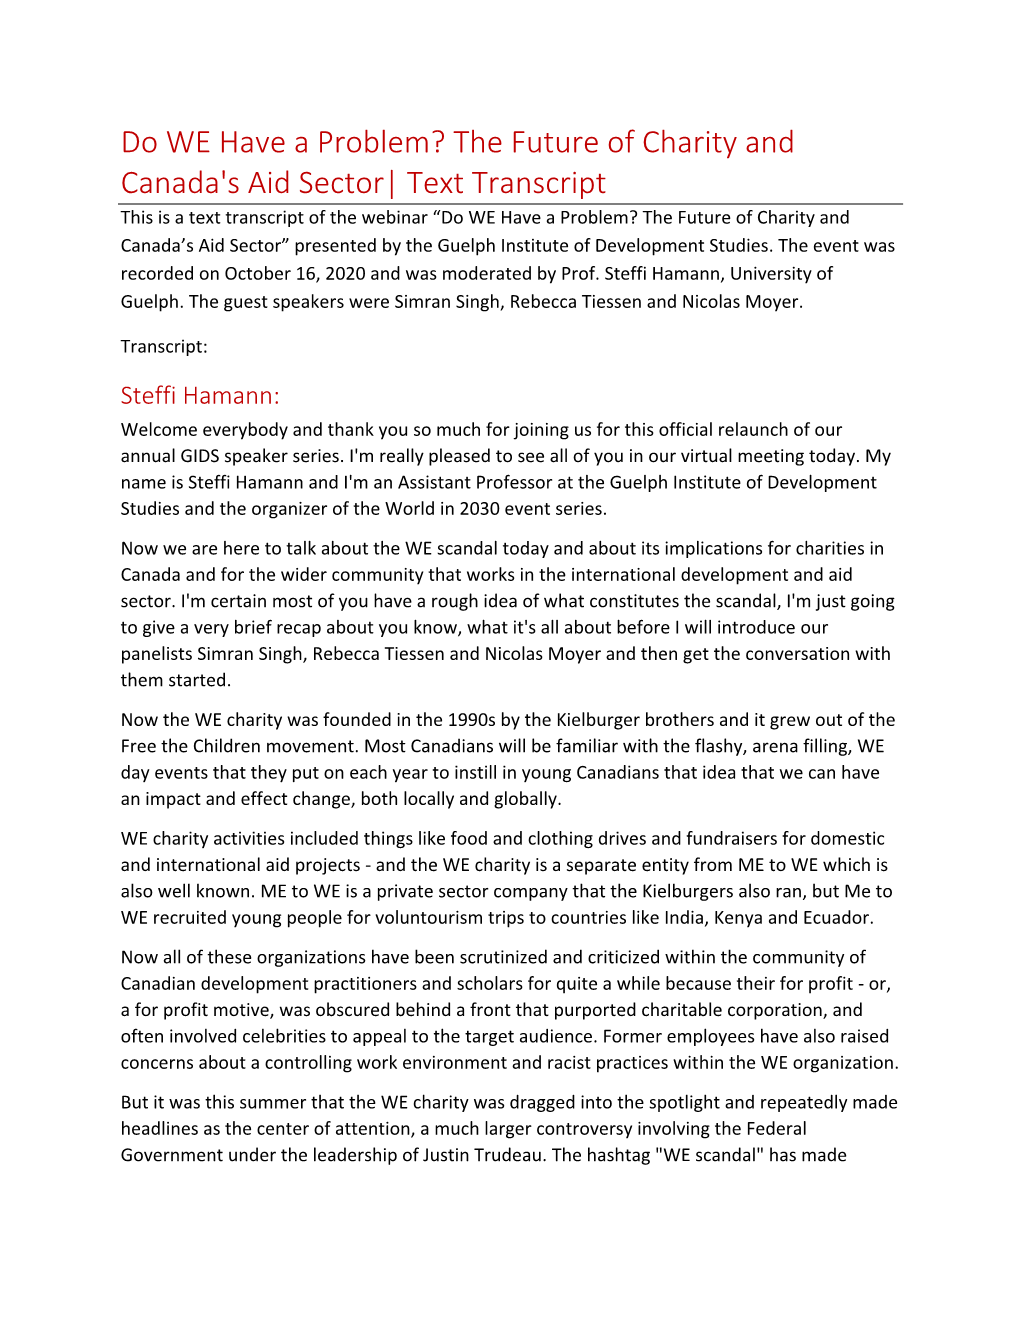 Do WE Have a Problem? the Future of Charity and Canada's Aid Sector| Text Transcript